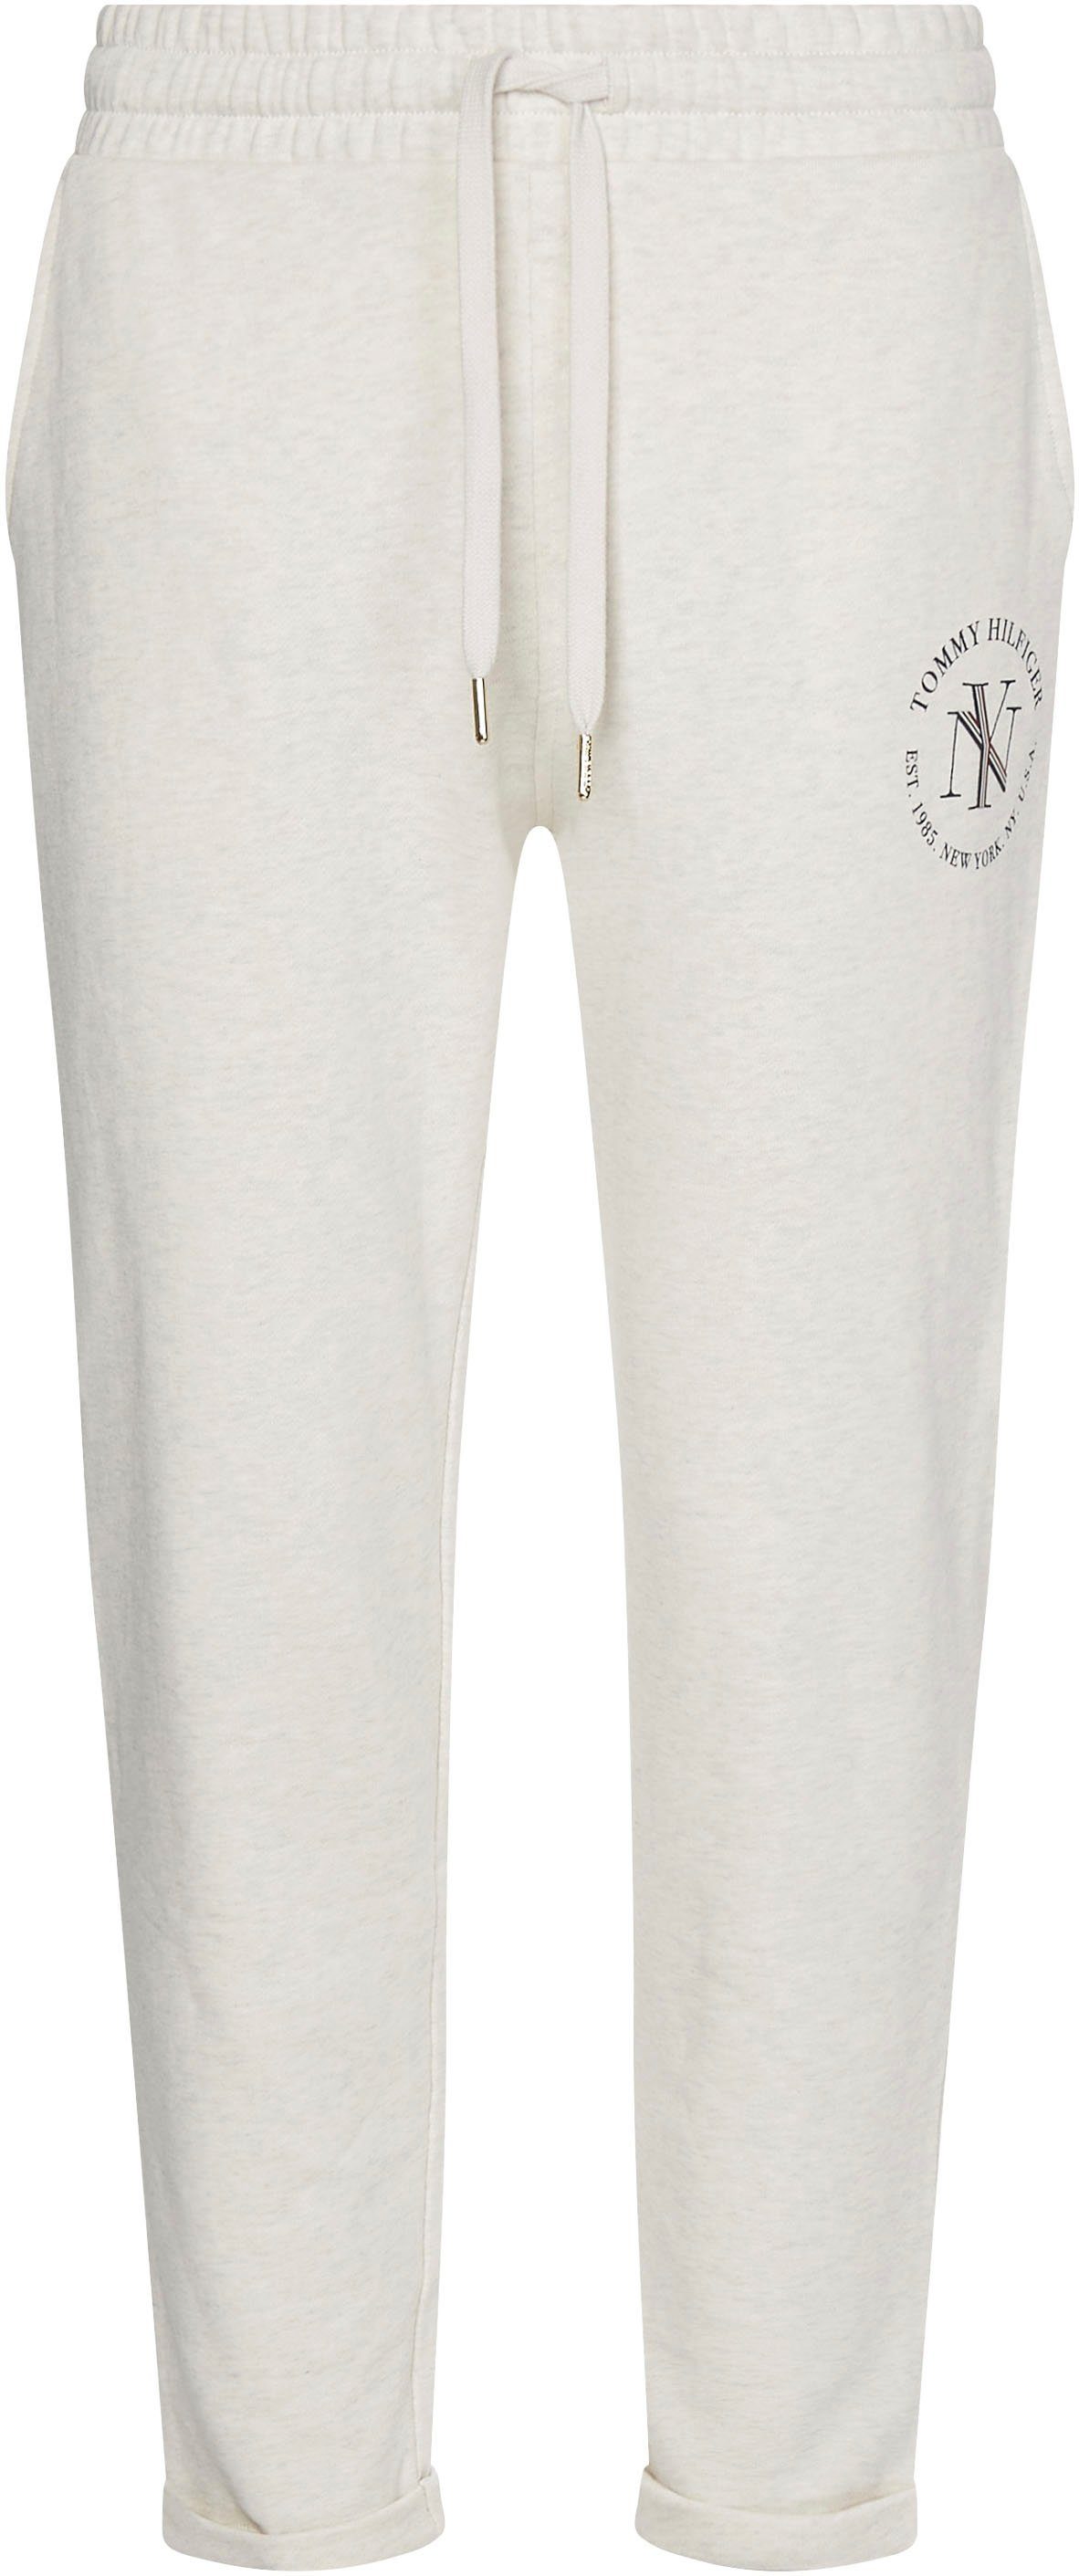 TAPERED Hilfiger ROUNDALL Hilfiger NYC Markenlabel Tommy Tommy Sweatpants SWEATPANTS mit White-Heather